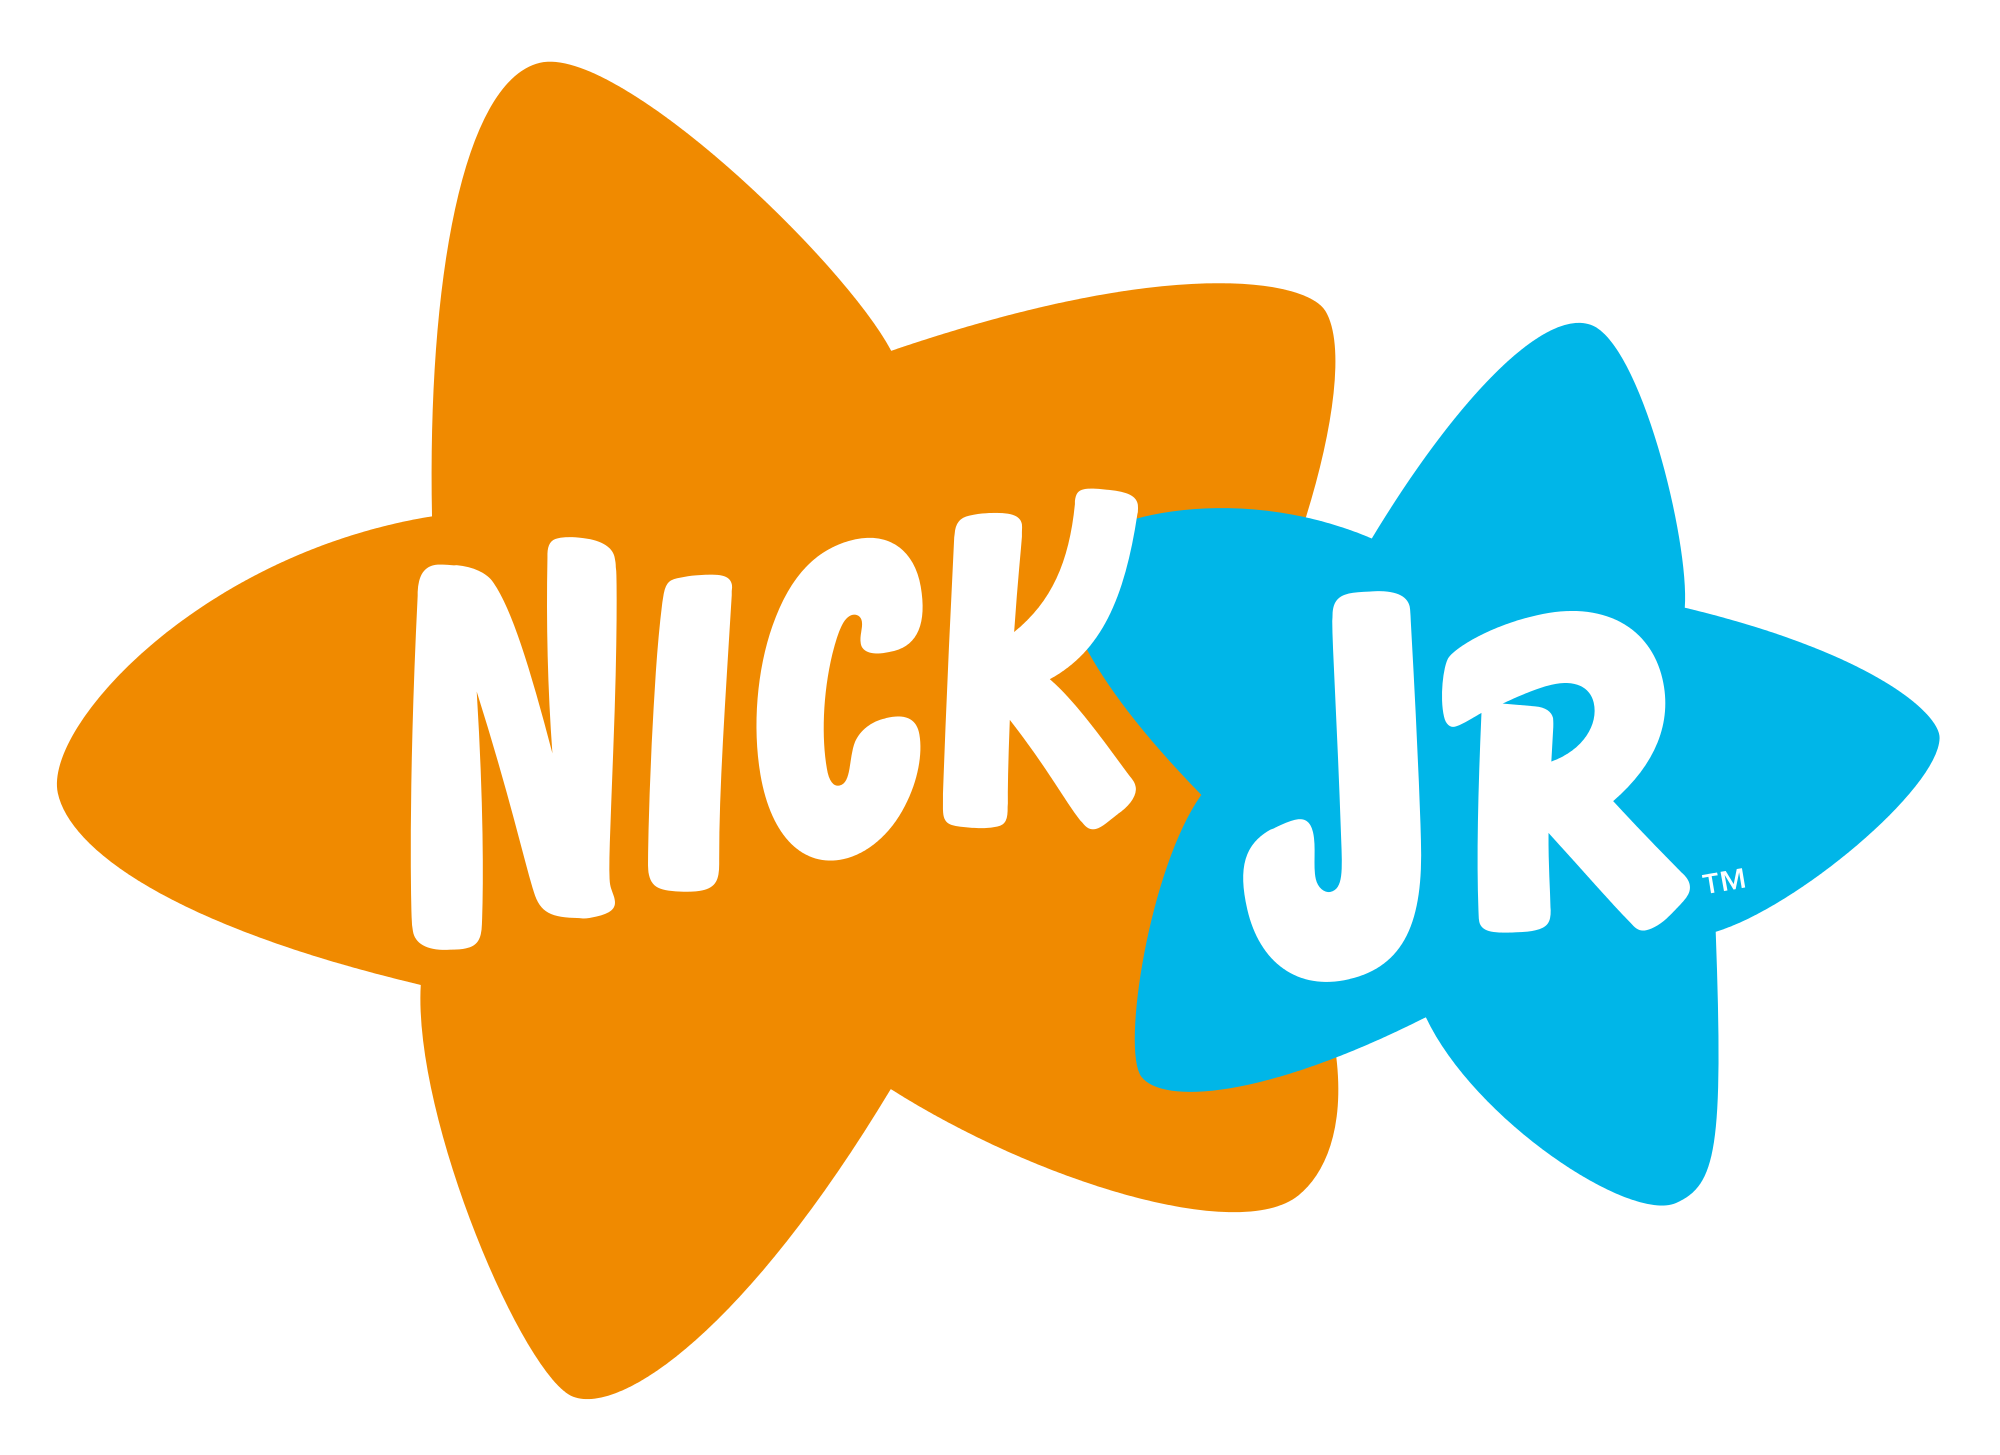 Nick Jr Productions Logopedia Nick The Smart Place To Play